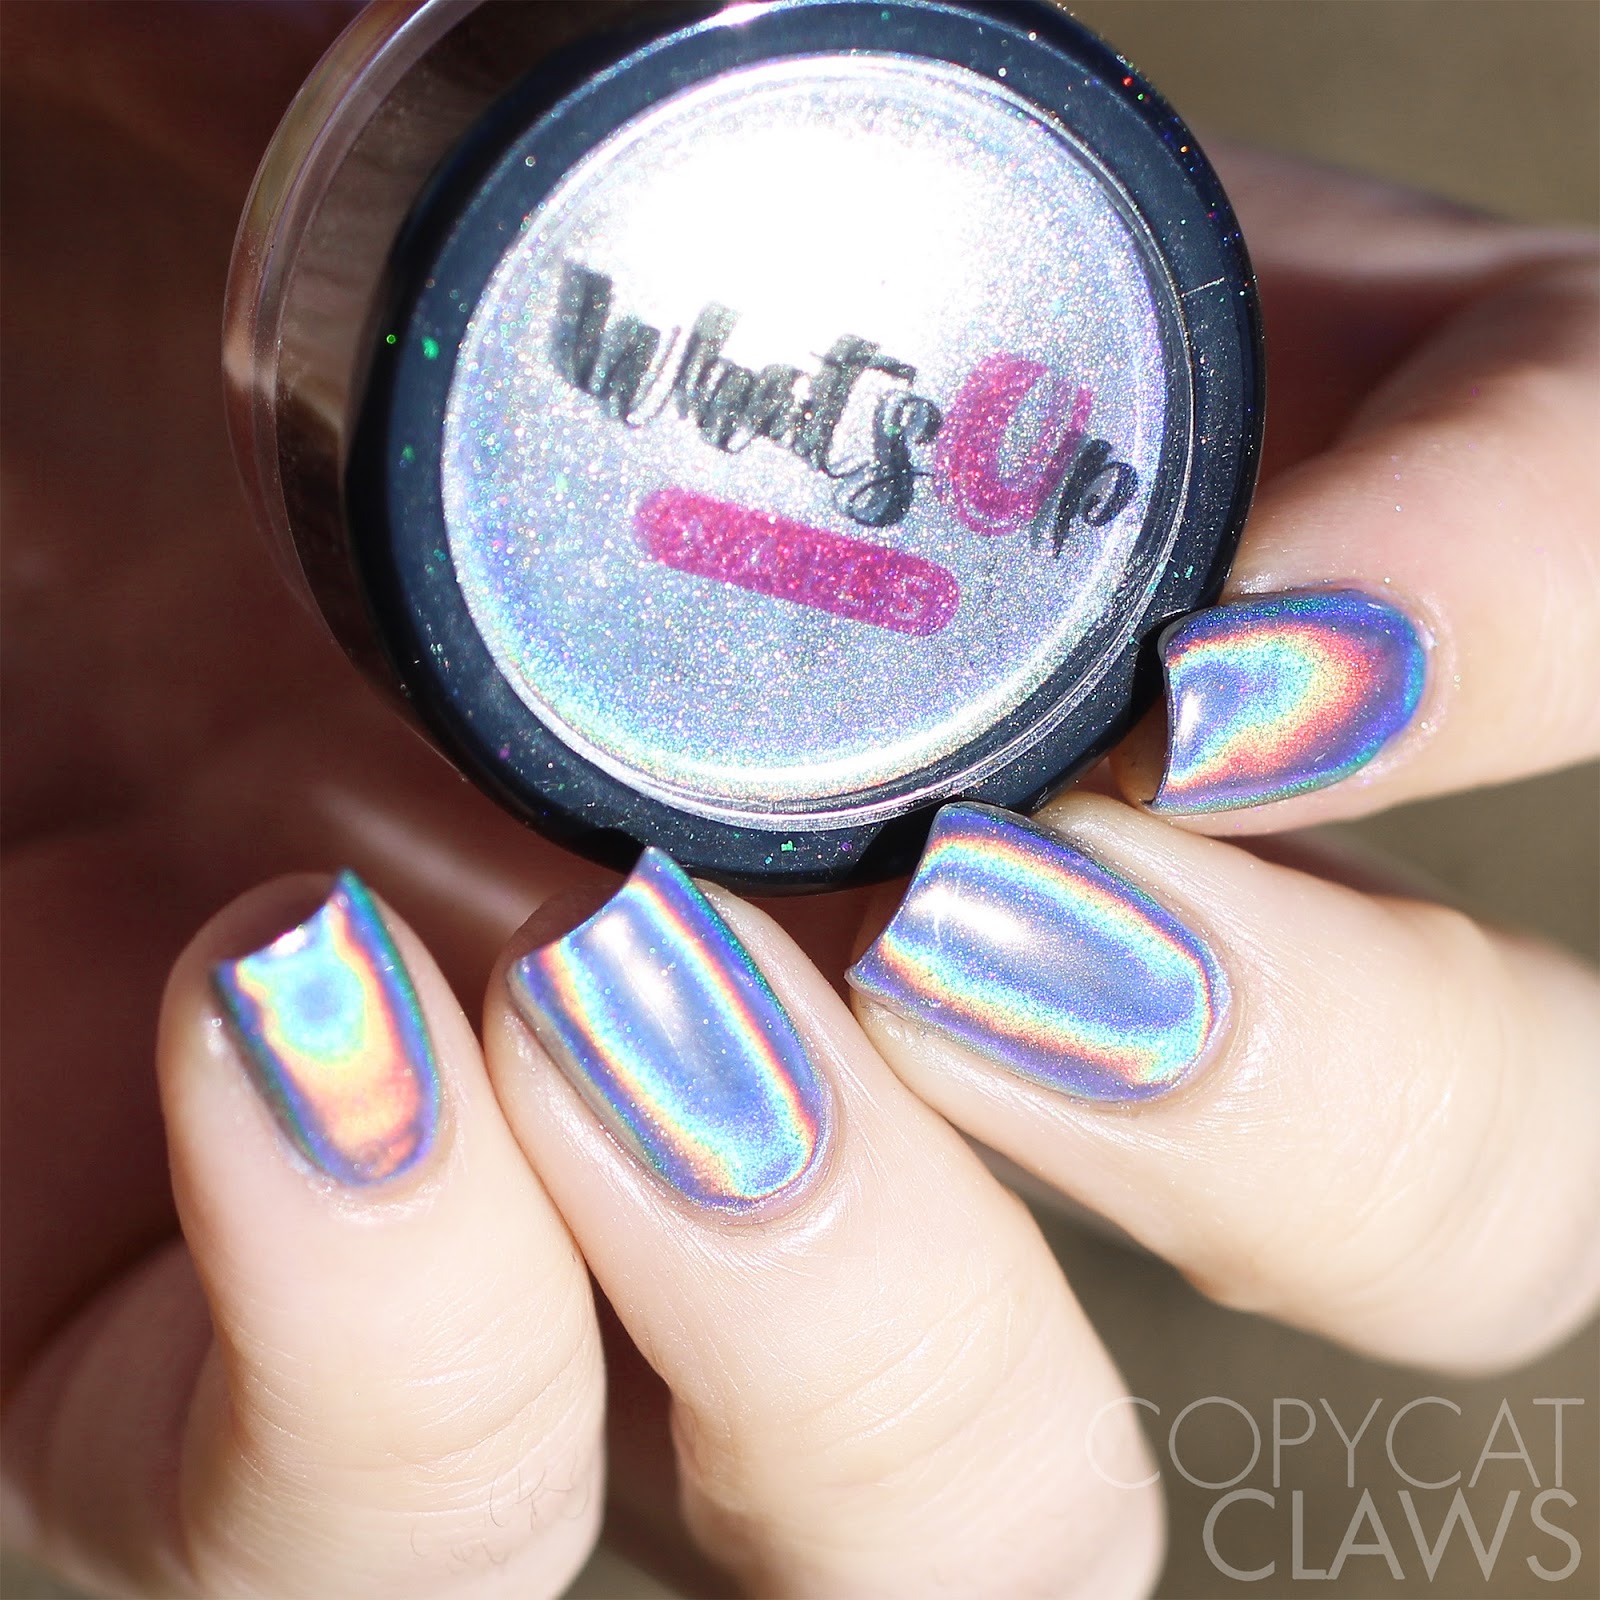 Holographic Powder for Nails - Whats Up Nails